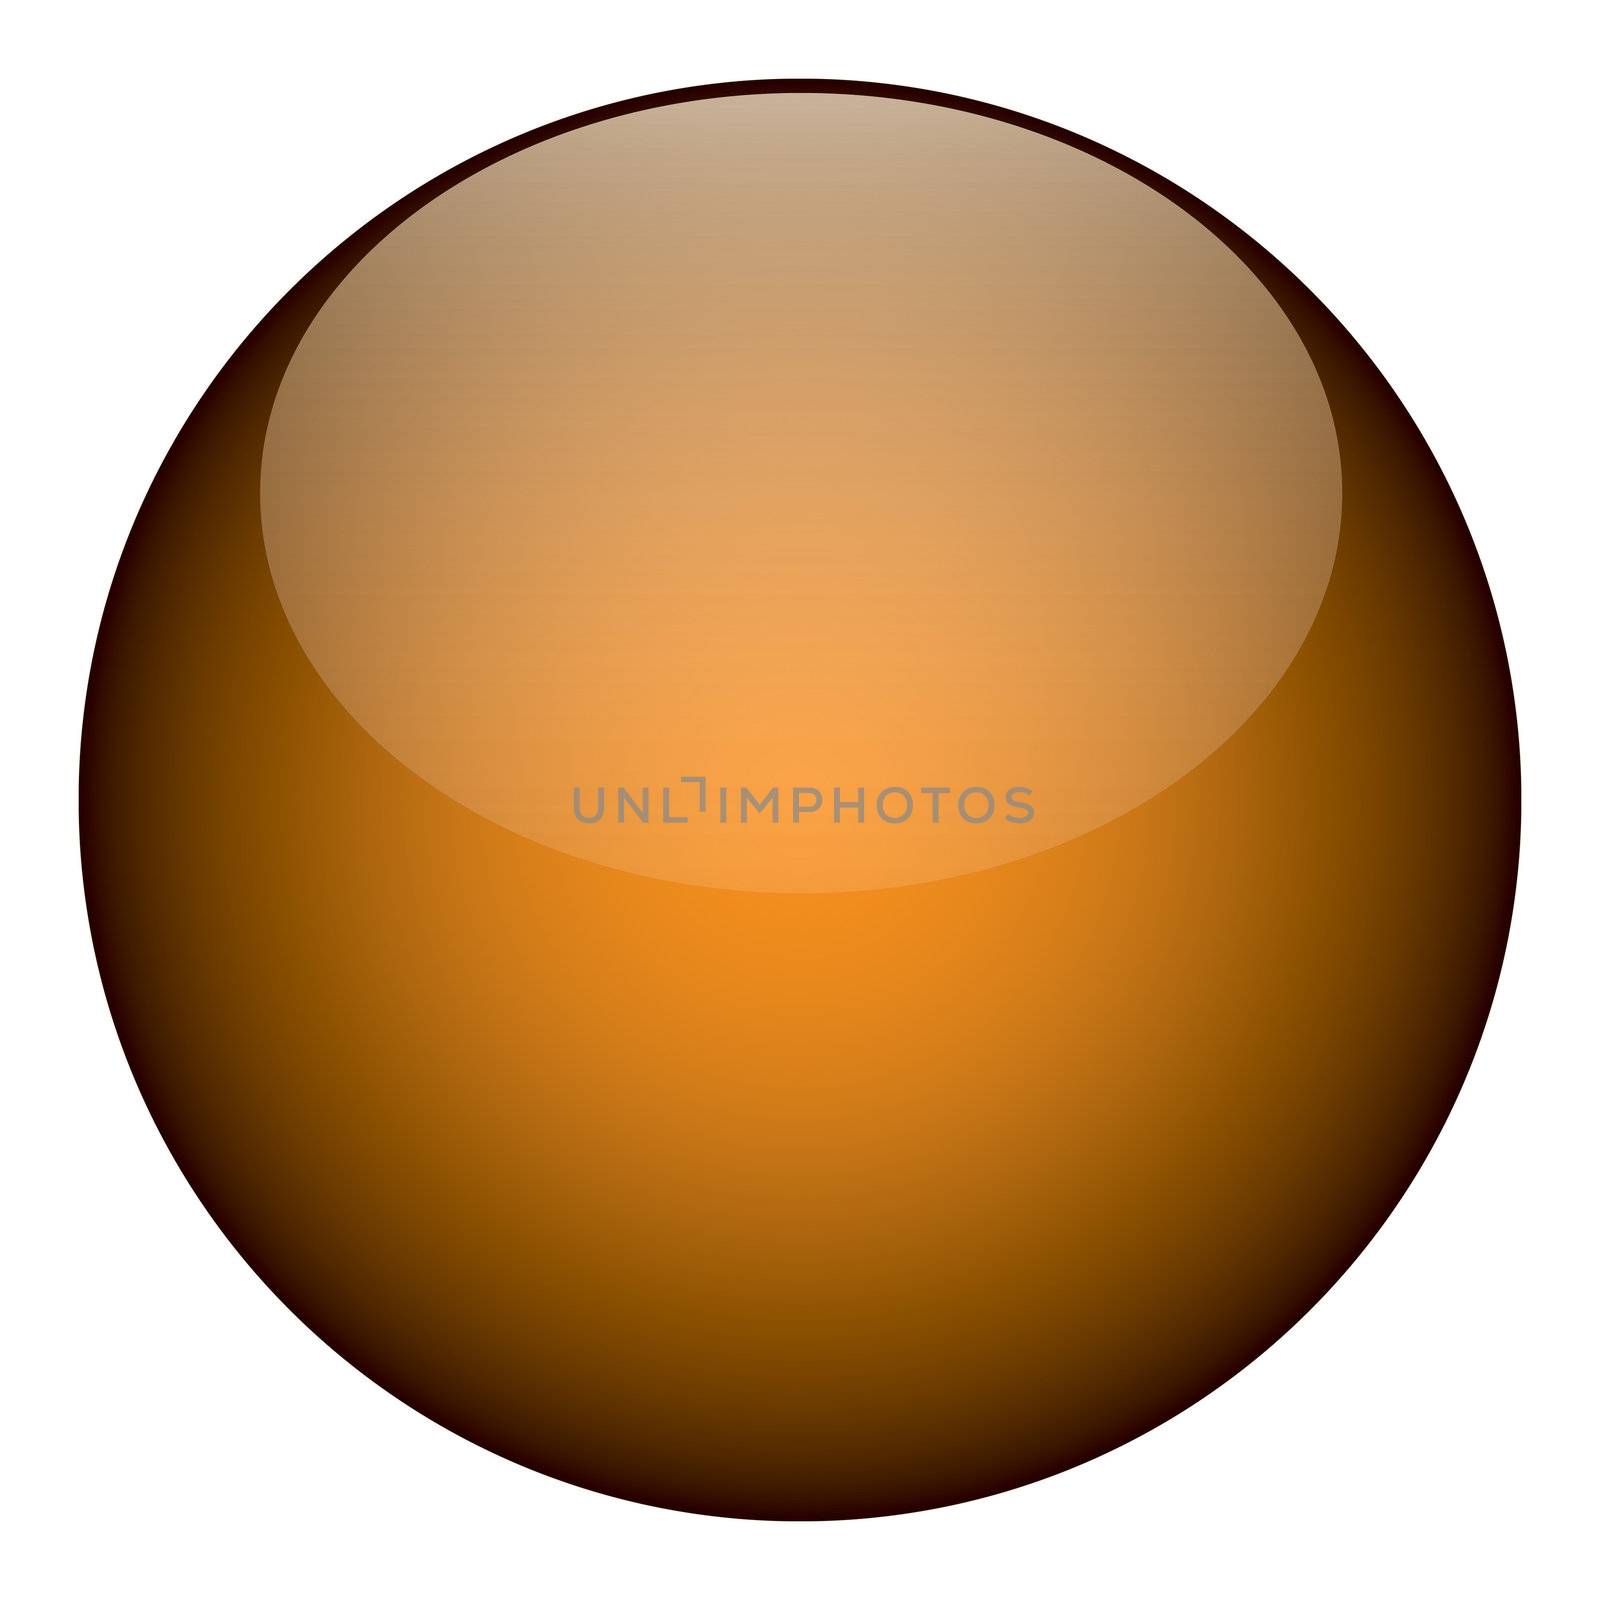 A 3d orange sphere shape - it can be a button, a planet, a piece of candy, whatever you think it looks like!